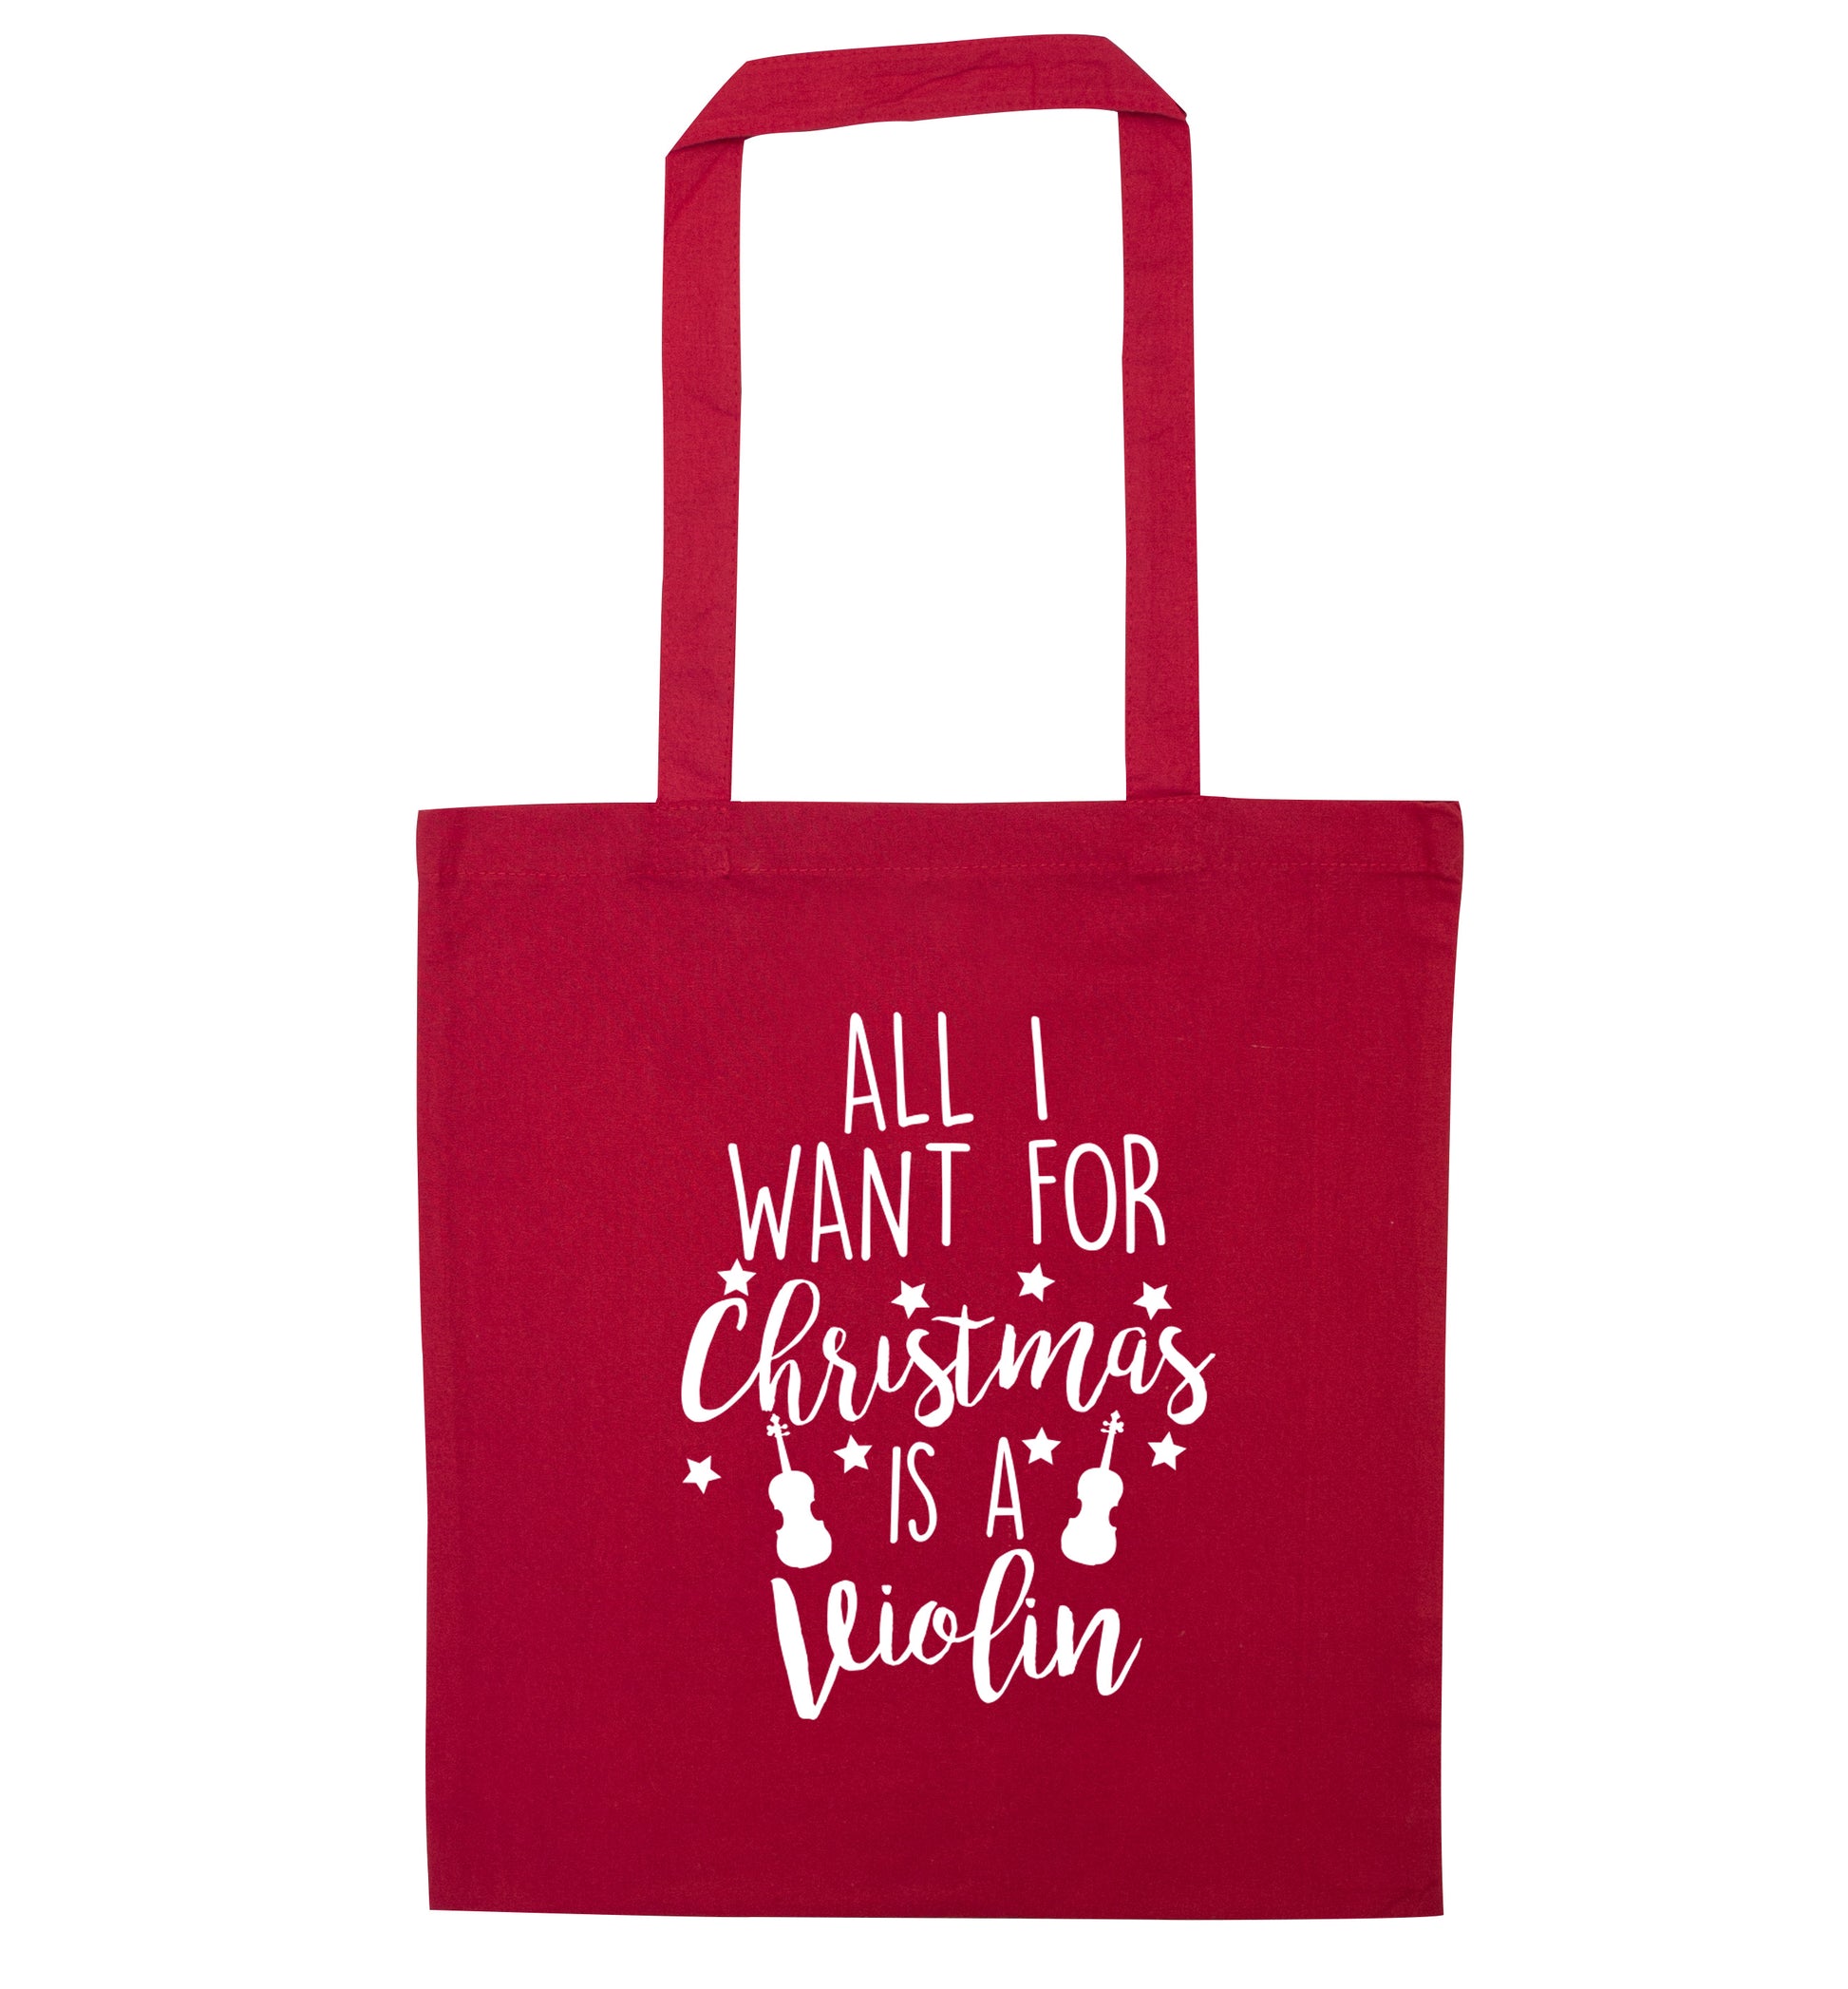 All I Want For Christmas is a Violin red tote bag